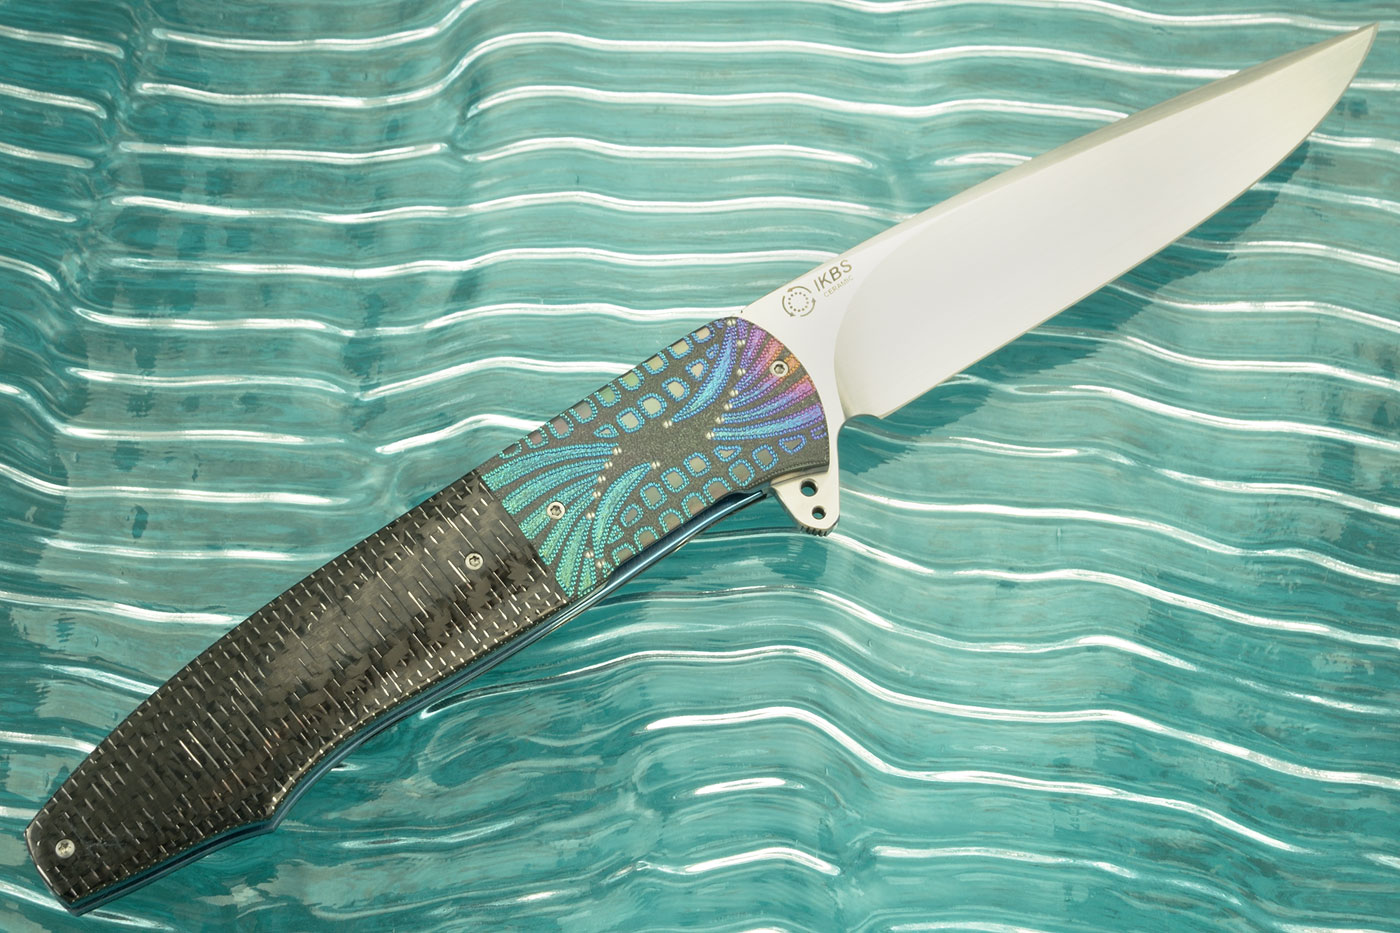 L20 Flipper with Linear Silver Strike Carbon Fiber and Zirconium (Ceramic IKBS) - CTS-XHP - LEFT HANDED